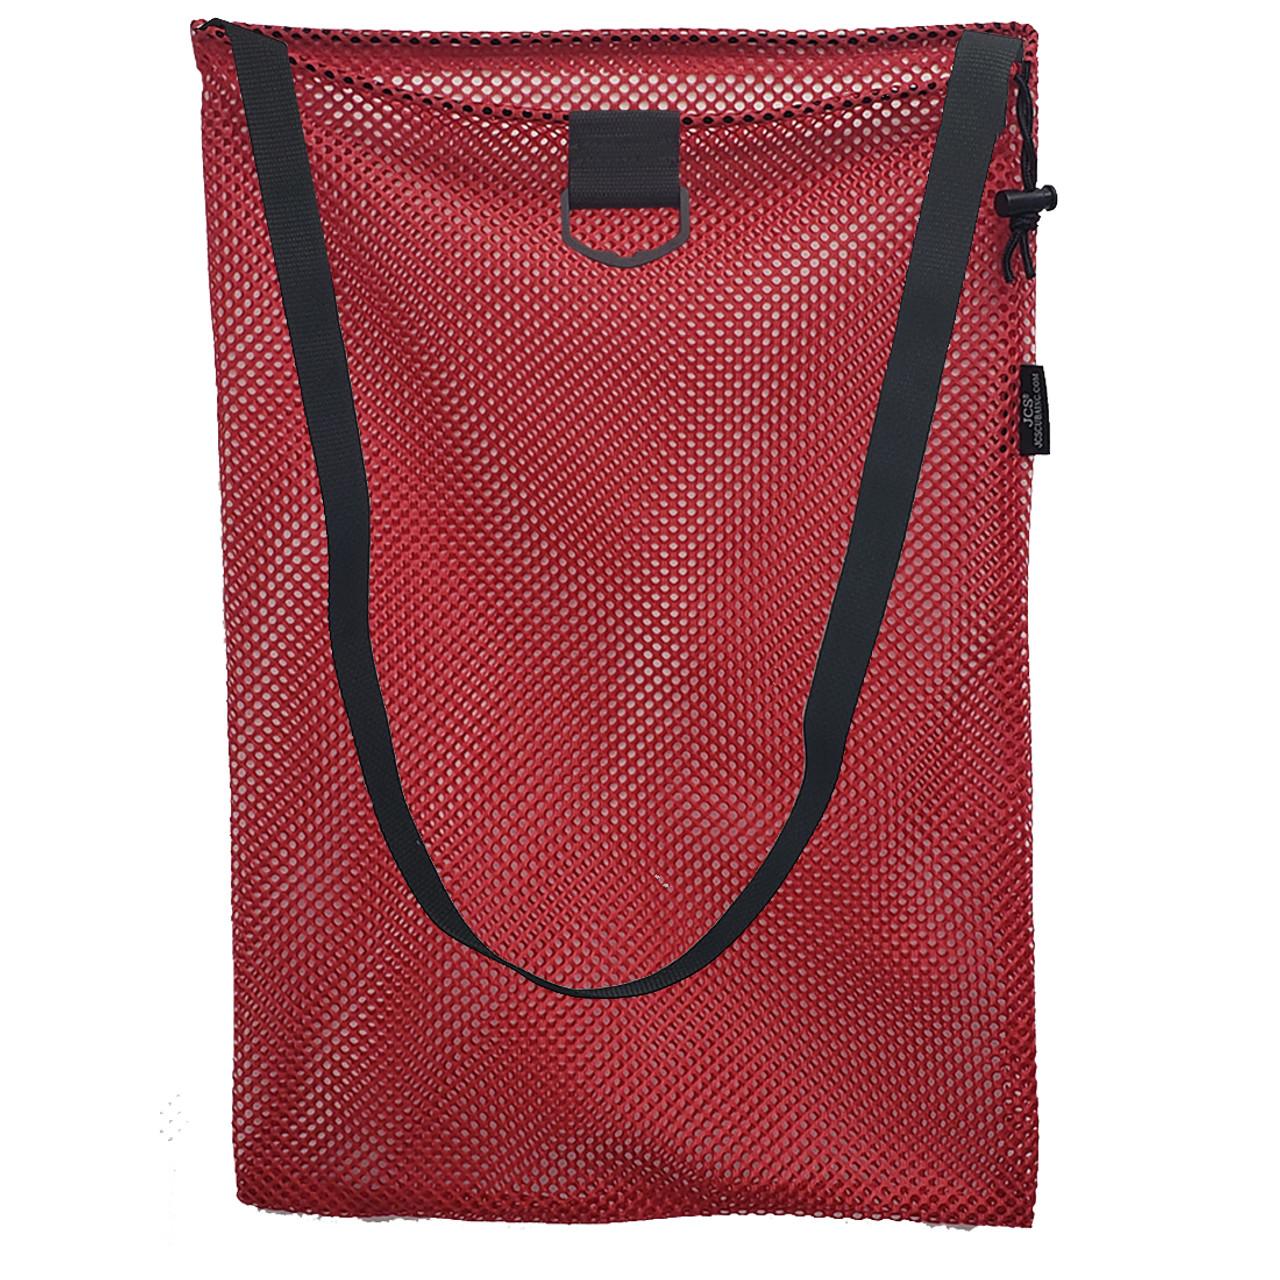 Nylon Mesh Drawstring Tote Bag with Shoulder Strap and D-Ring, Approx. 15x20, Red